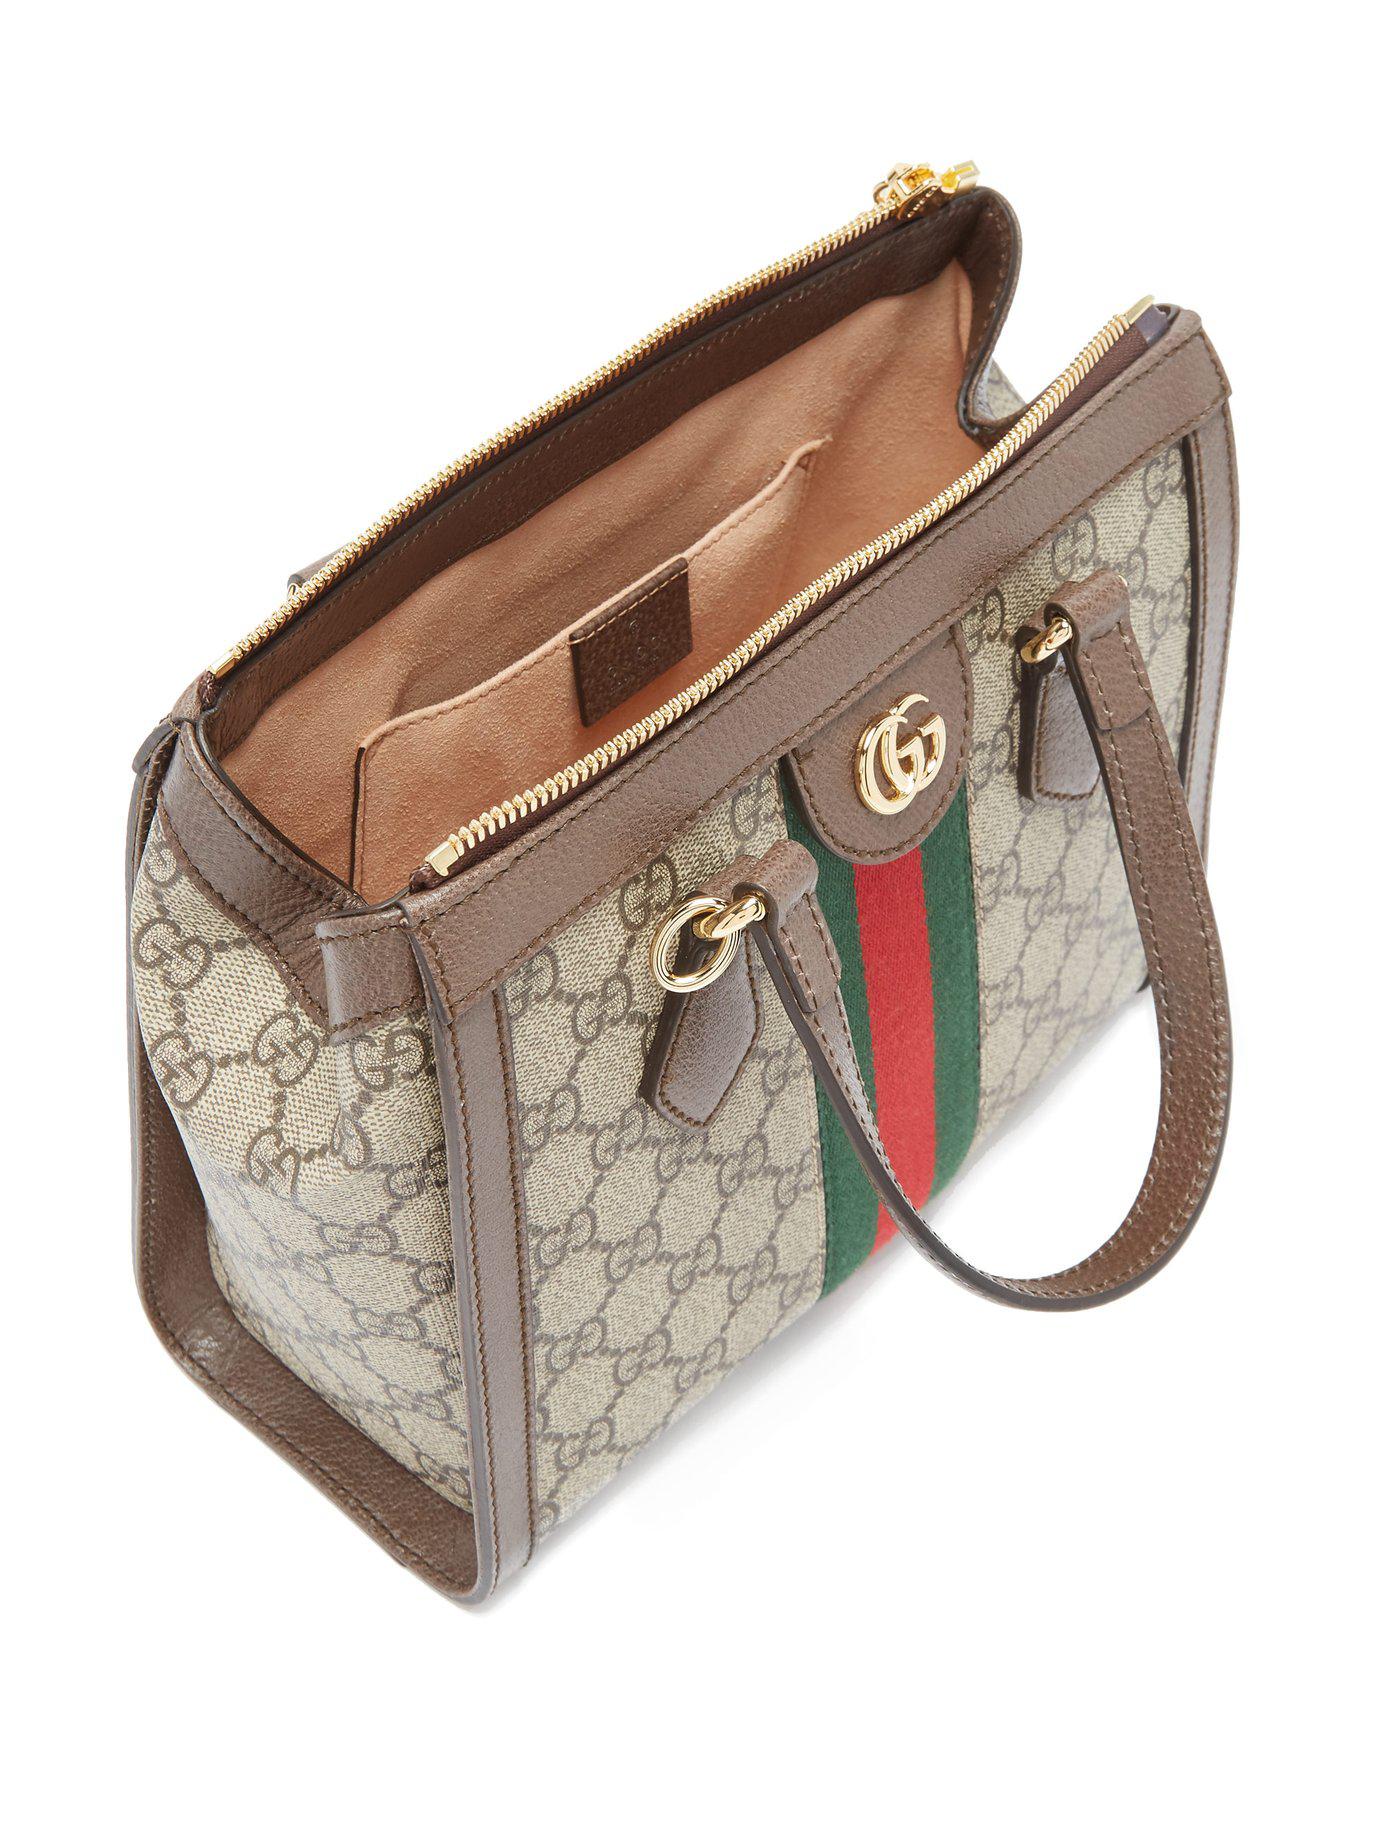 Gucci Ophidia Gg Supreme Canvas Cross Body Bag in Gray - Lyst